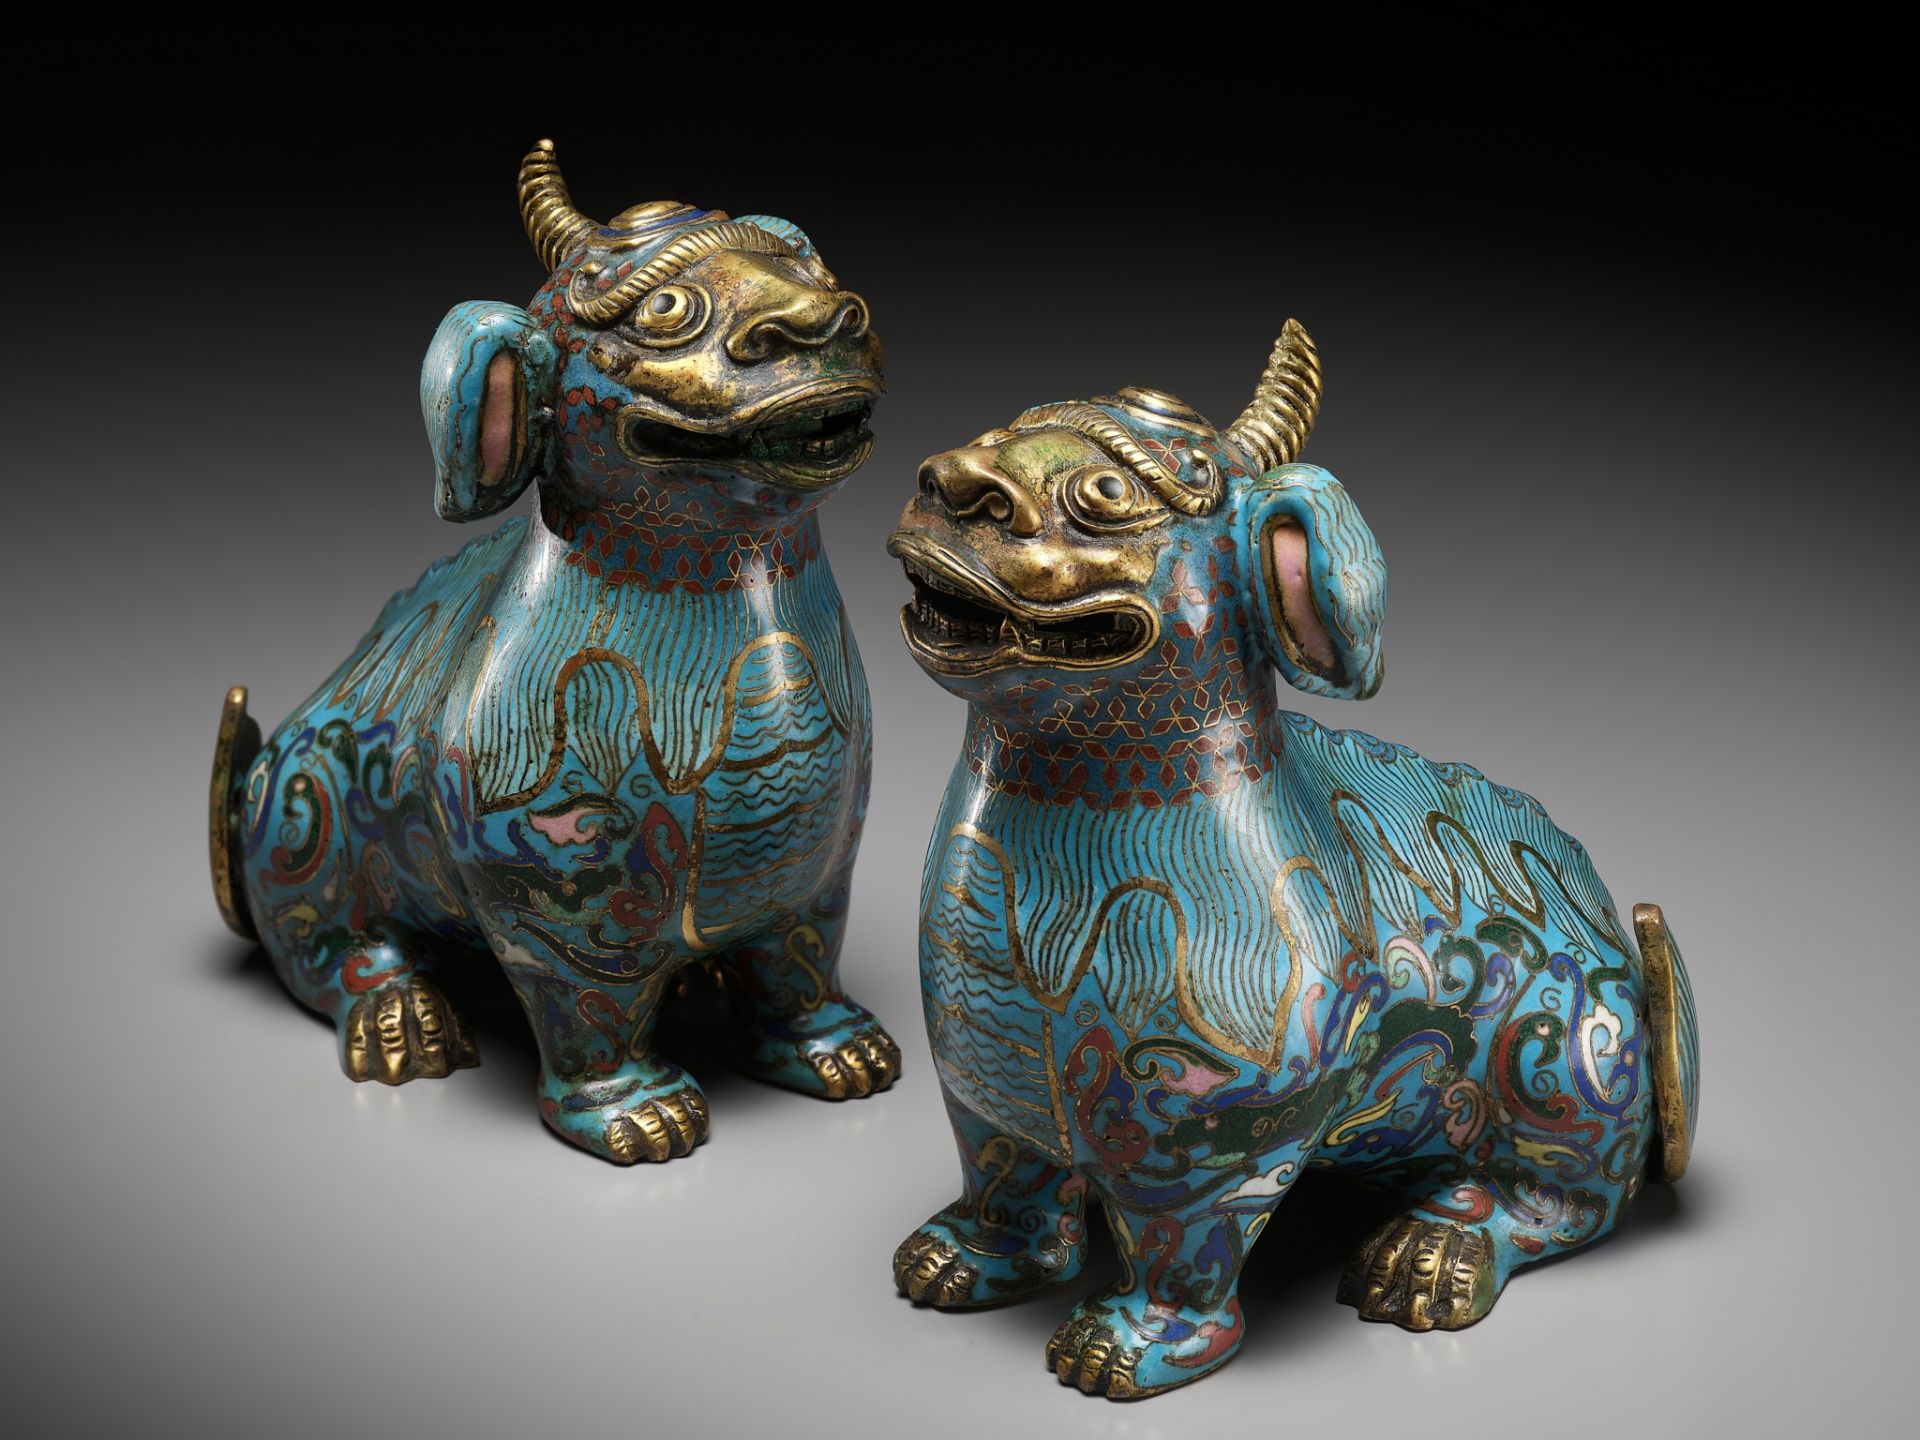 A PAIR OF GILT-BRONZE AND CLOISONNE ENAMEL LUDUAN, CHINA, 18TH - 19TH CENTURY - Image 9 of 11